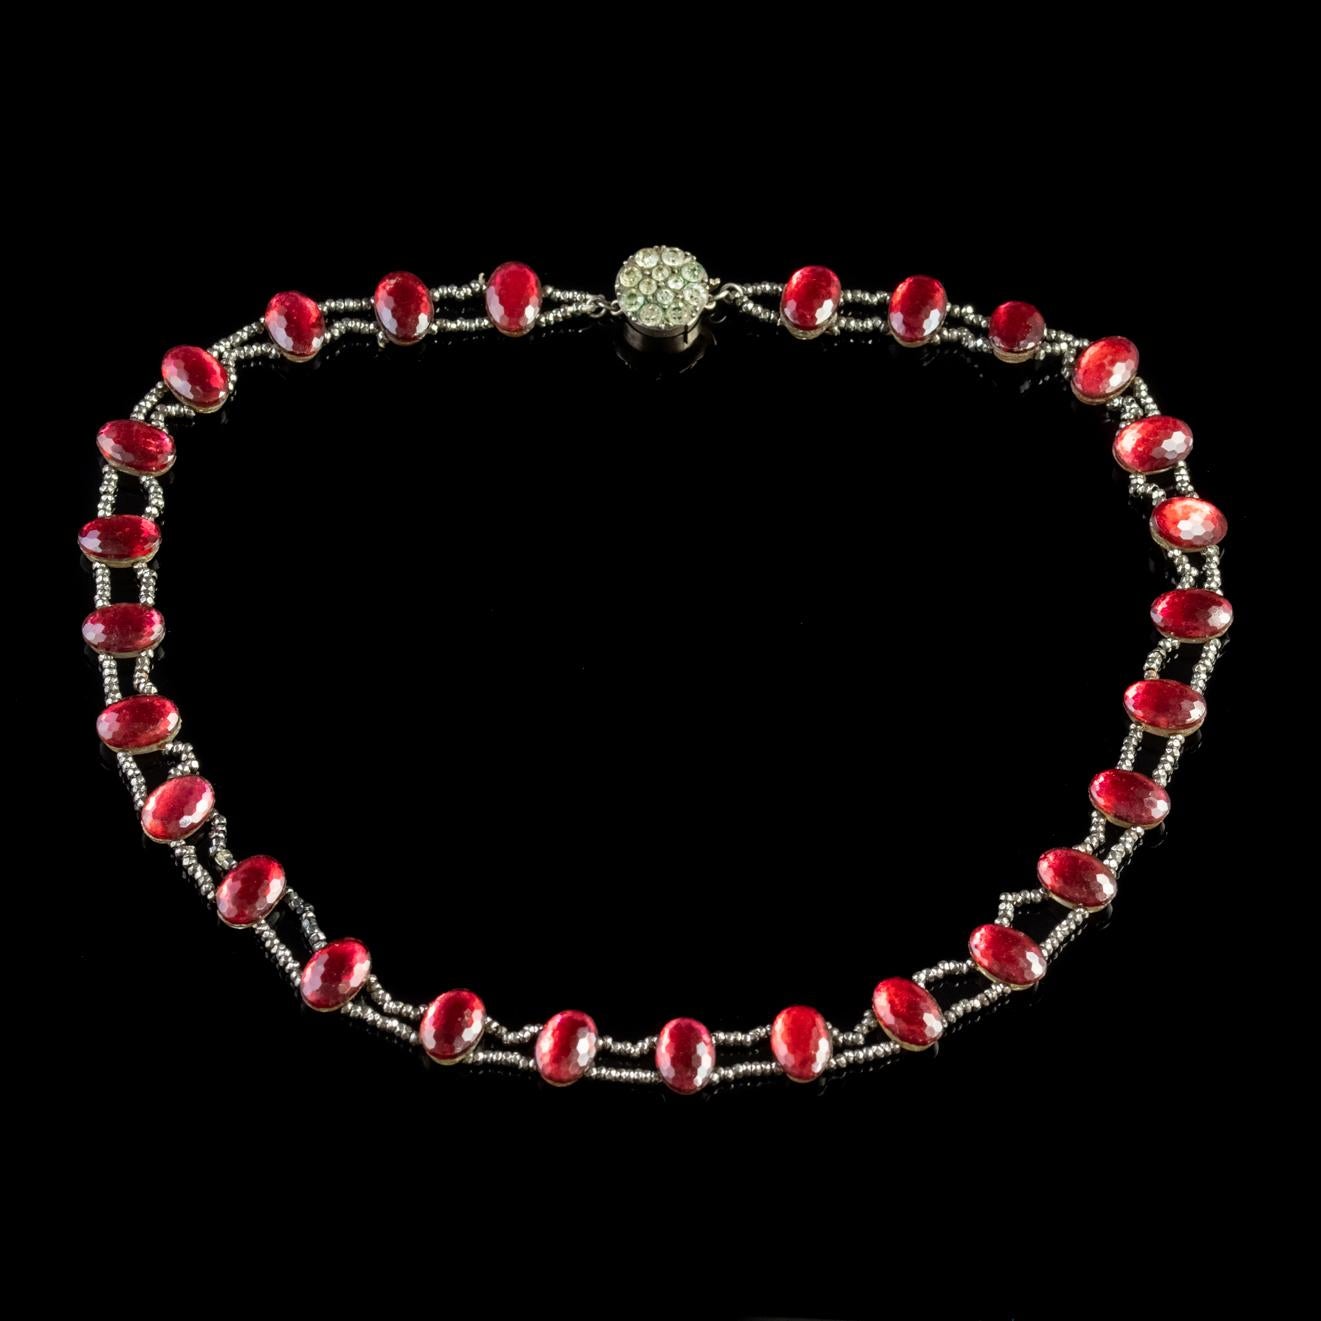 An exquisite antique Georgian collar made up of bold red Paste Stones with geometric facets across the surface allowing the stones to shimmer in the light.  

Paste is a heavy, transparent flint glass that simulates the fire and brilliance of